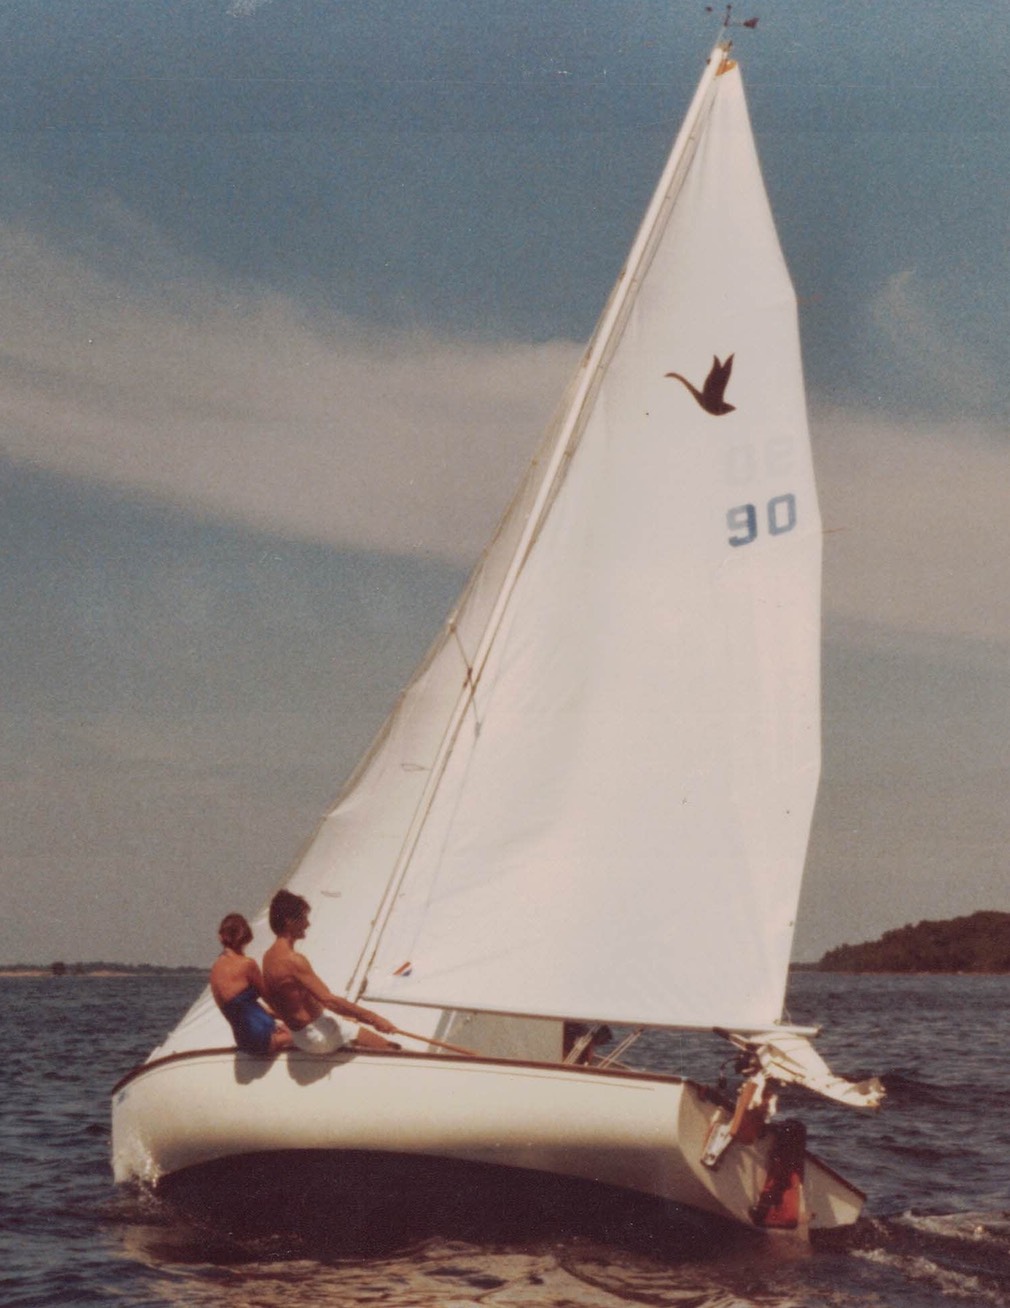 The Hope Island Race Tragedy of 1982